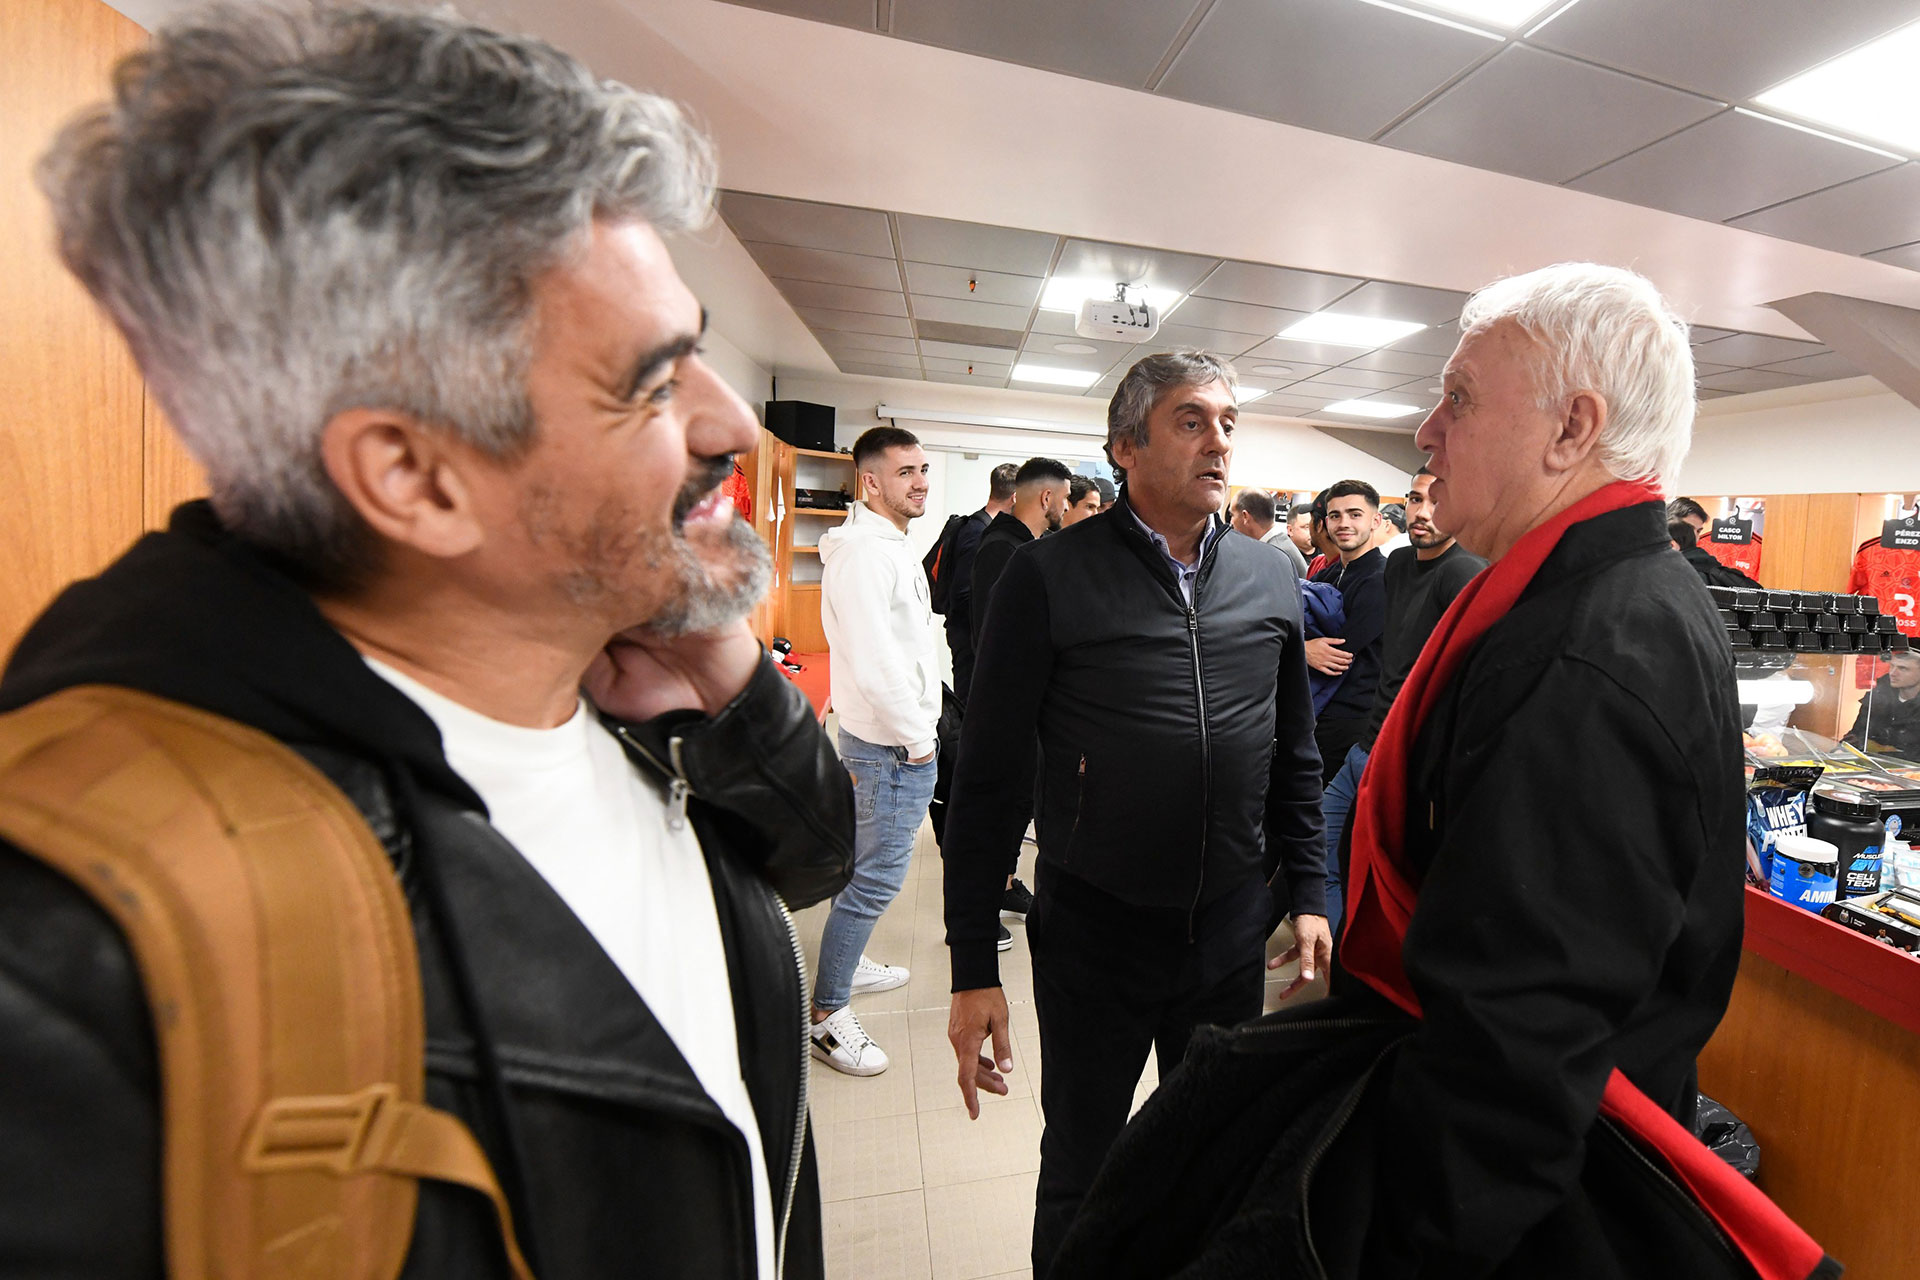 Ortega, Enzo and Beto, a meeting of old glories (Twitter / River Plate)